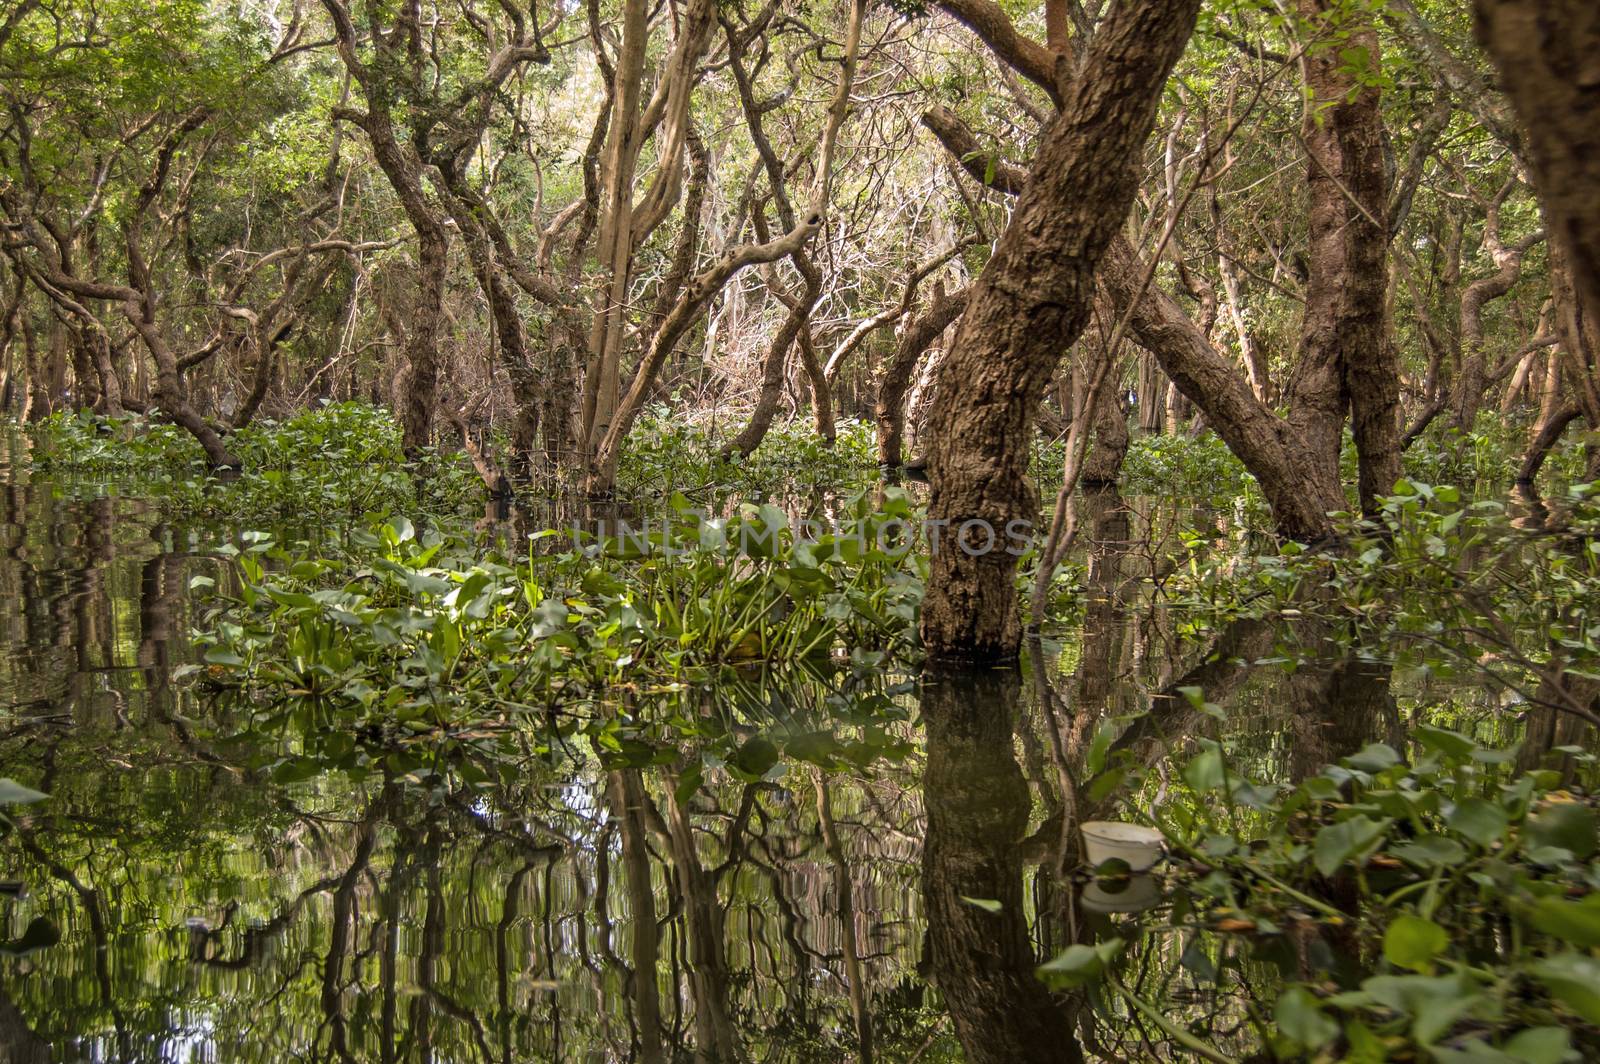 Flooded forest, Tonle Sap Lake, Cambodia by BasPhoto